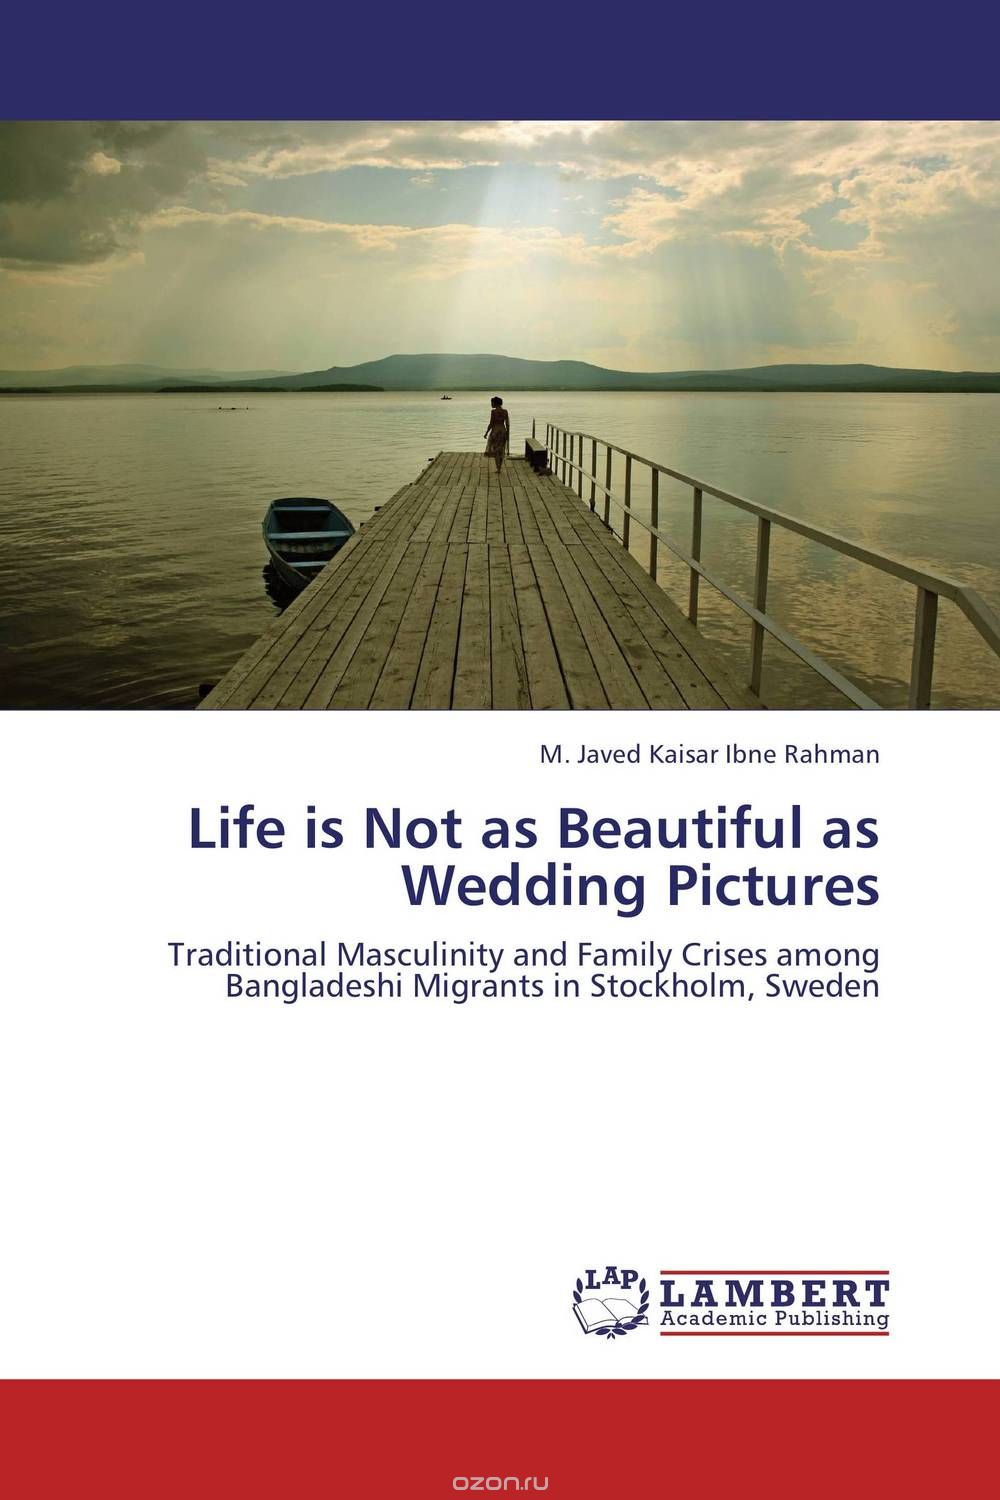 Life is Not as Beautiful as Wedding Pictures